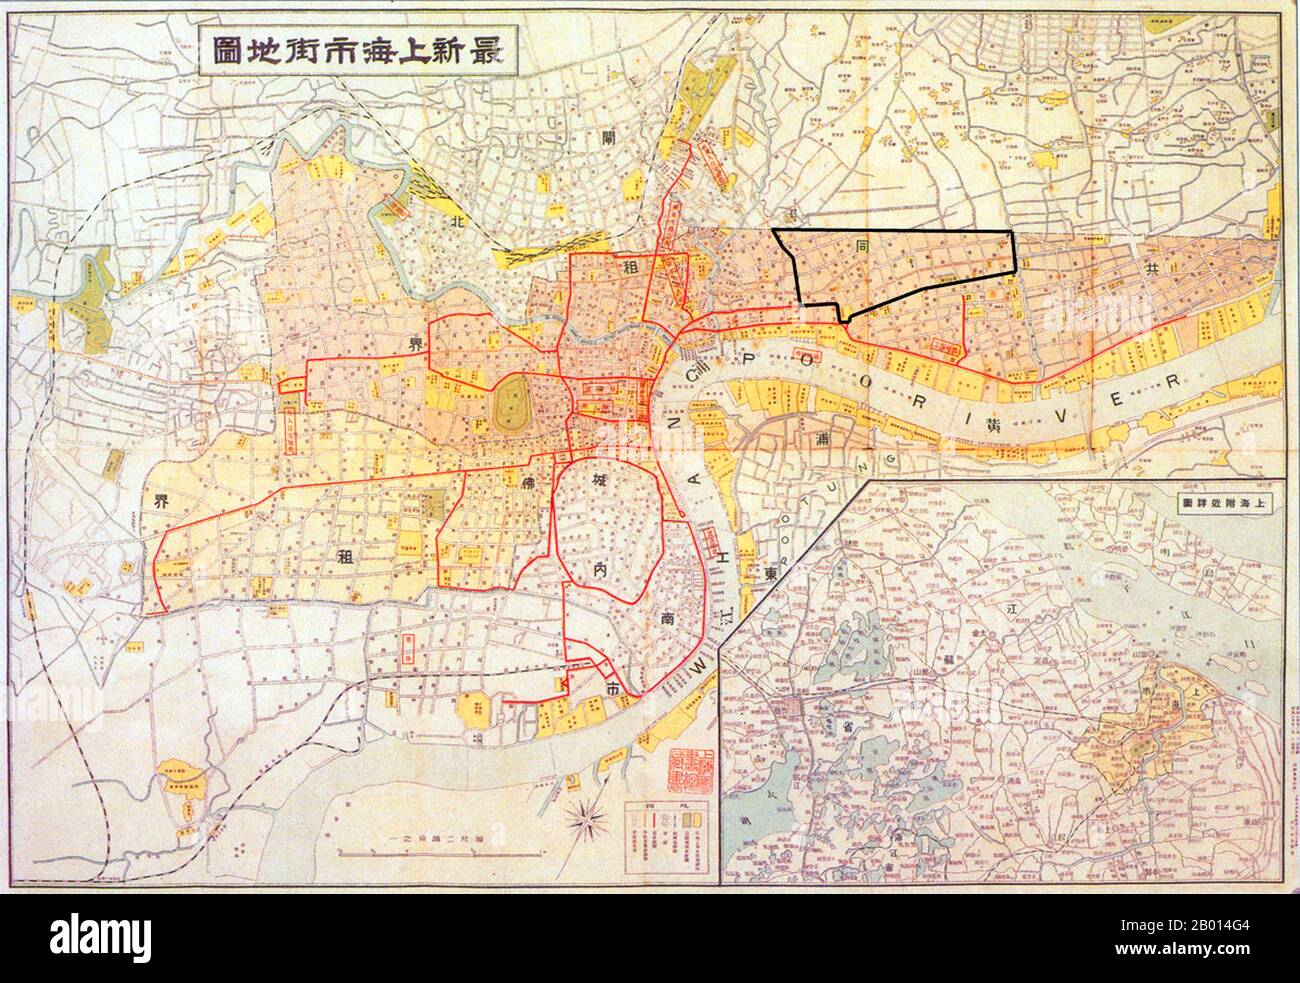 China: Map of Shanghai showing the area of the Shanghai Ghetto or 'Restricted Sector for Jewish Refugees' (1939).  The map is in Chinese and some English, but may have been made by or under the auspices of the Japanese who occupied the area of Shanghai including the (as yet unformed) 'Jewish Ghetto' in 1937 following the Battle of Shanghai. The 'Shanghai Ghetto' was established by the Japanese Occupation Authorities in 1941 and liberated in 1945. Stock Photo